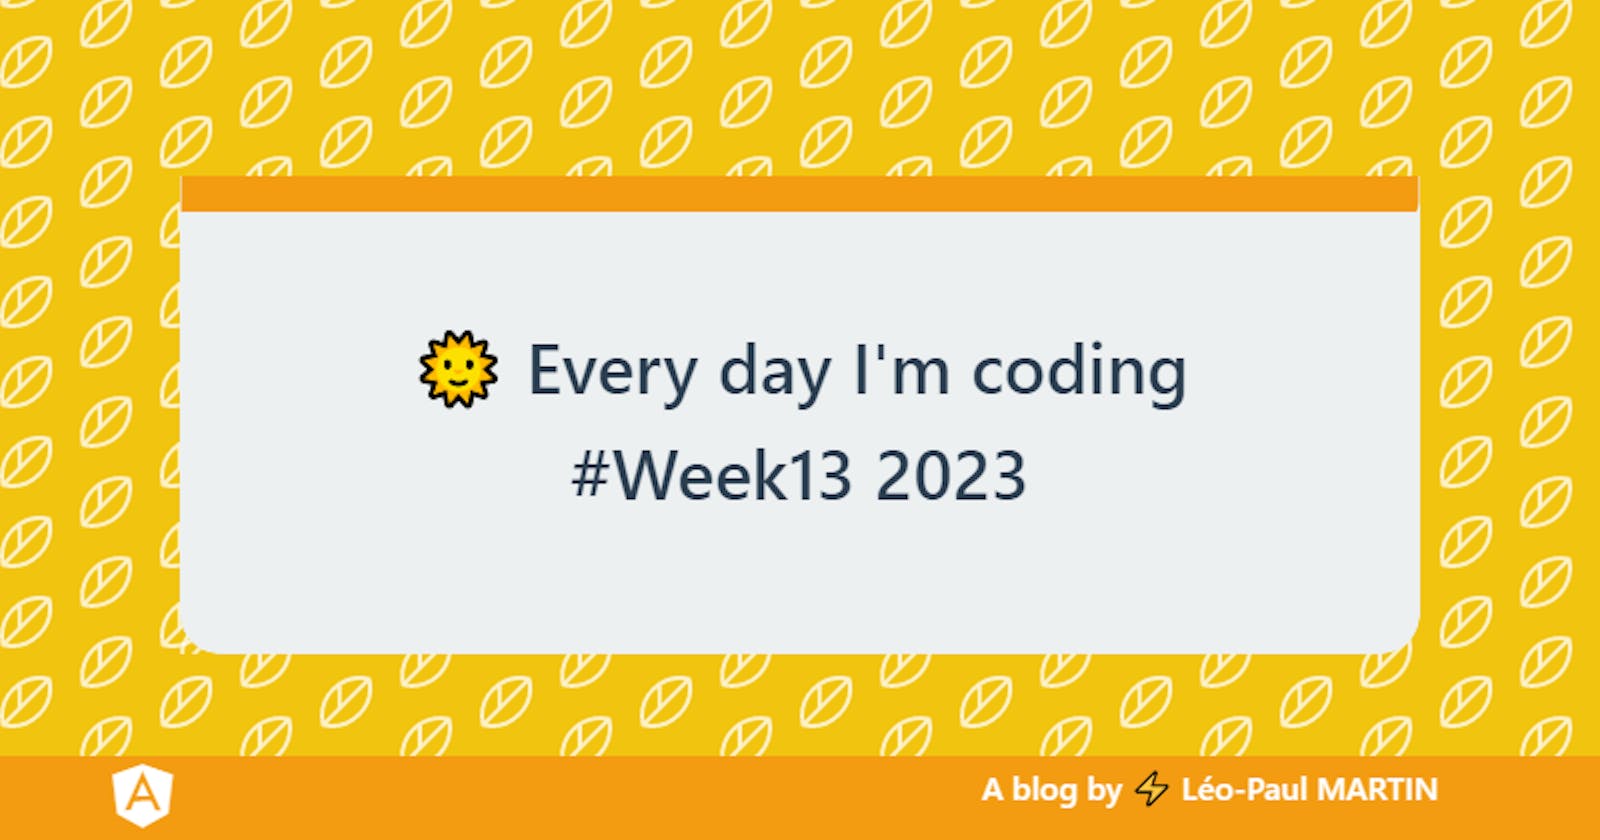 🌞 Every day I'm coding #Week13 2023